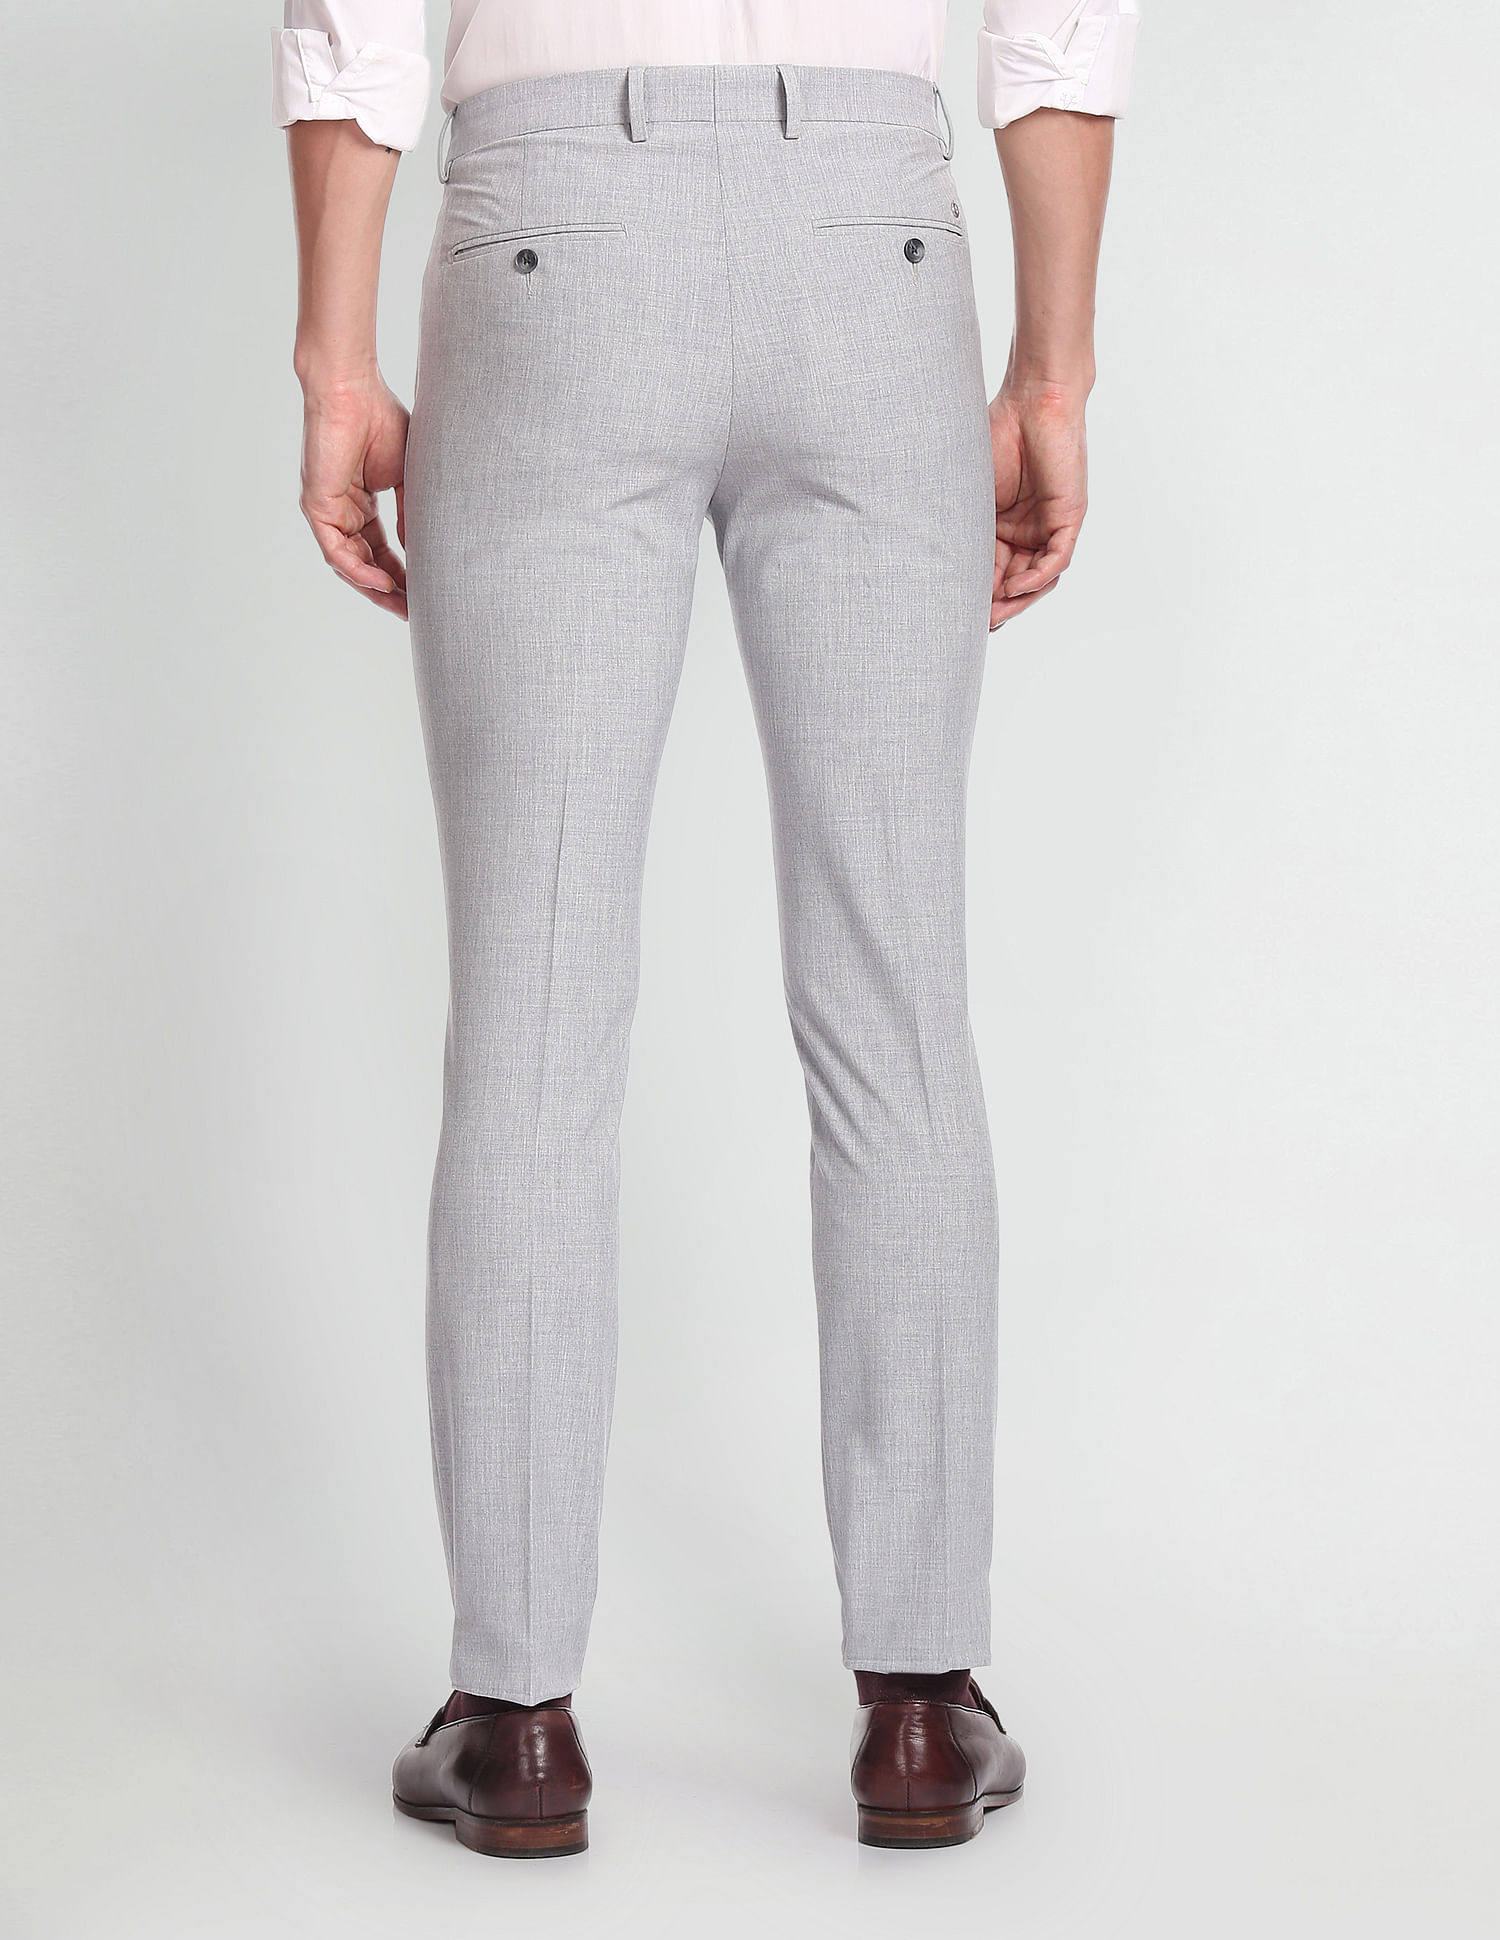 Park Avenue Trousers & Lowers for Men sale - discounted price | FASHIOLA  INDIA